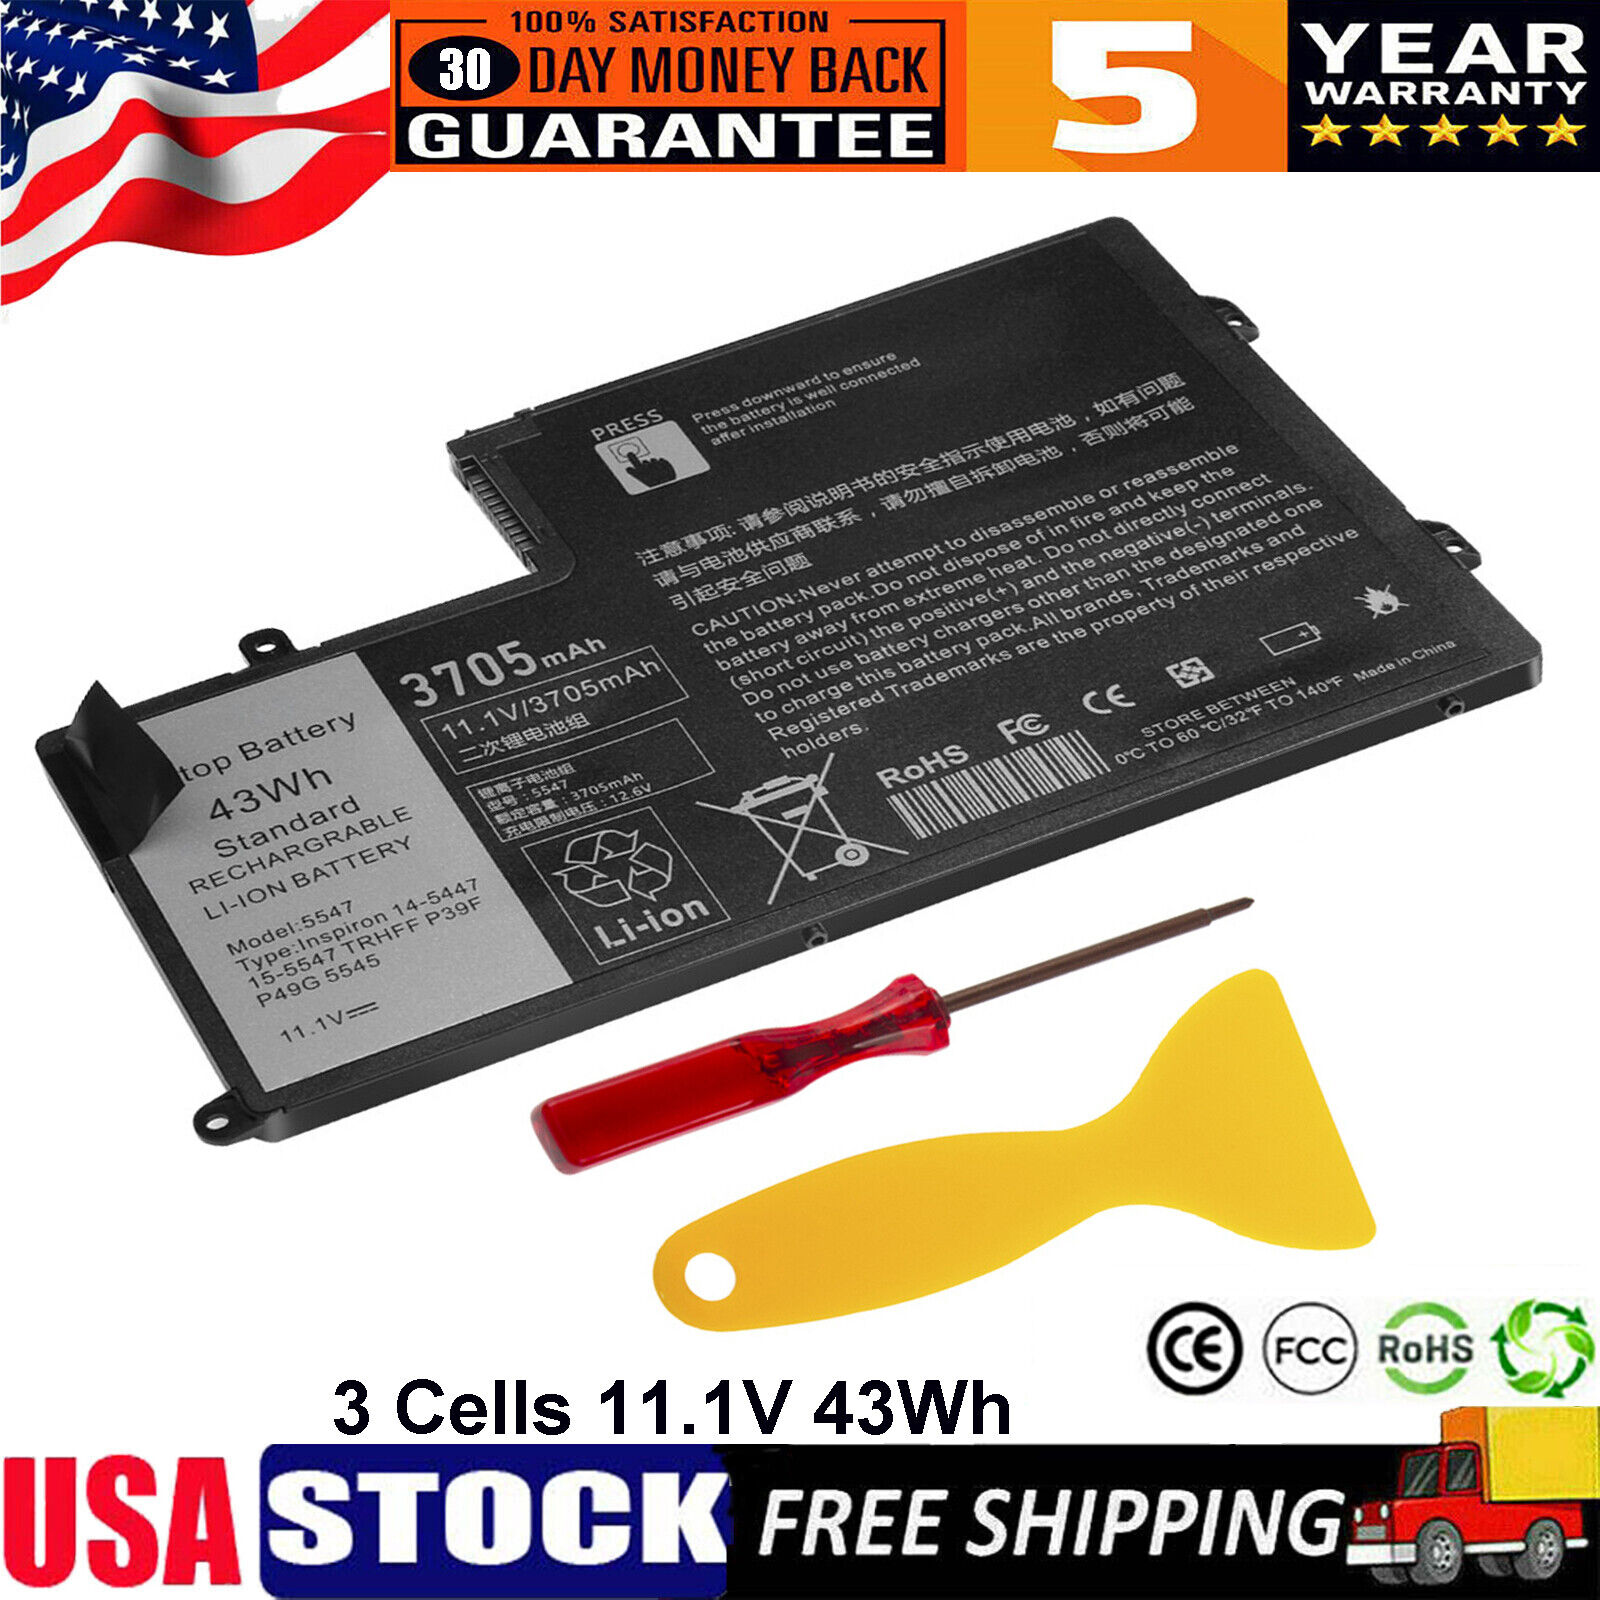 Brand NEW-Battery for Dell Inspiron 5547 5548 5447 TRHFF 1V2F6 01V2F 0PD19 FAST